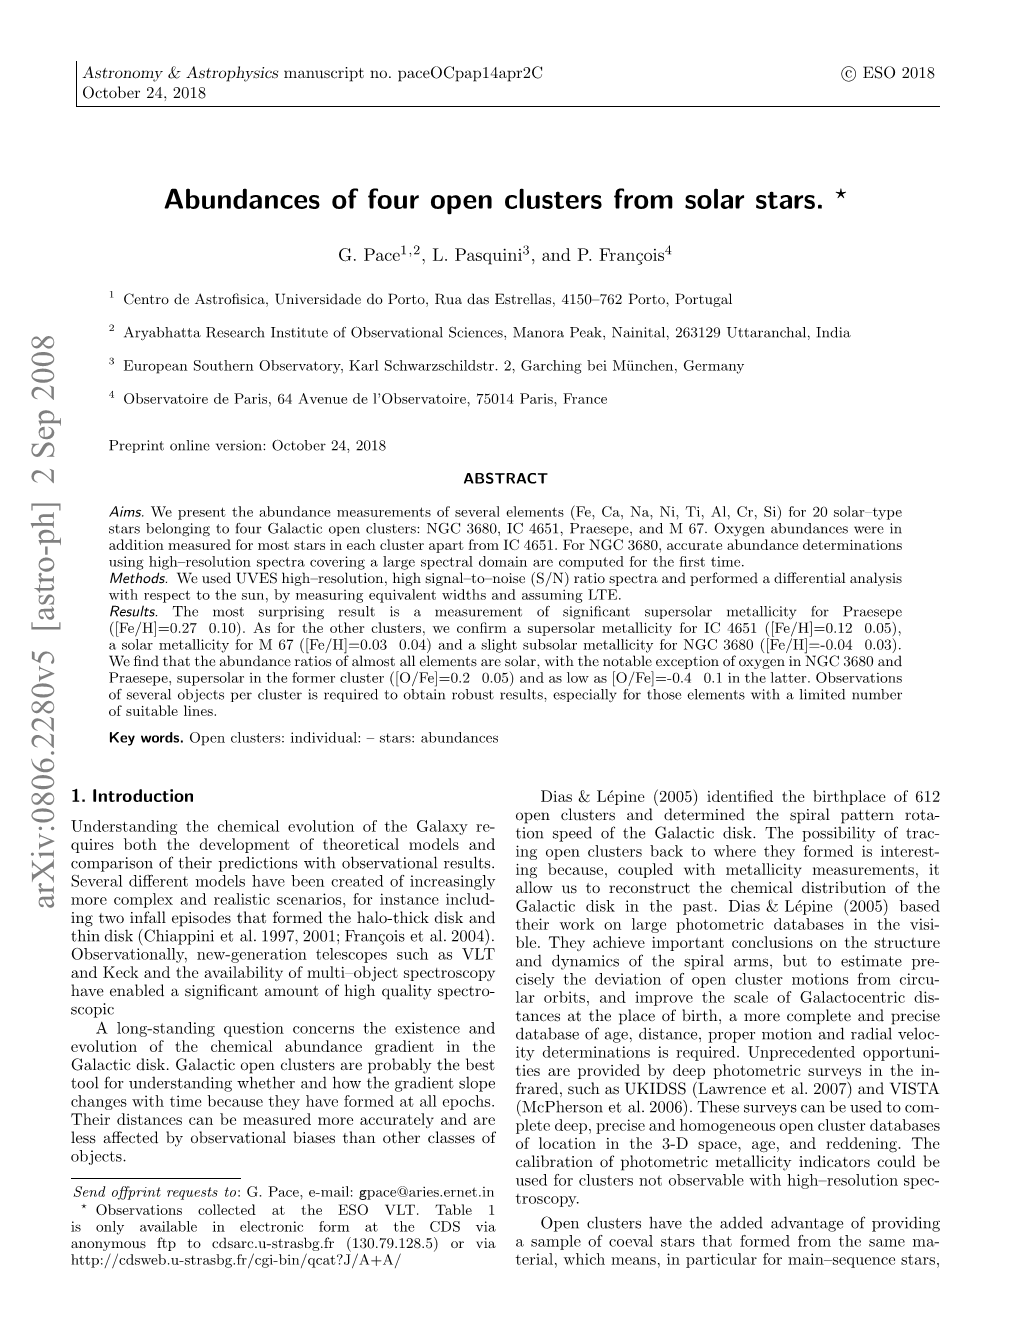 Abundances of Four Open Clusters from Solar Stars